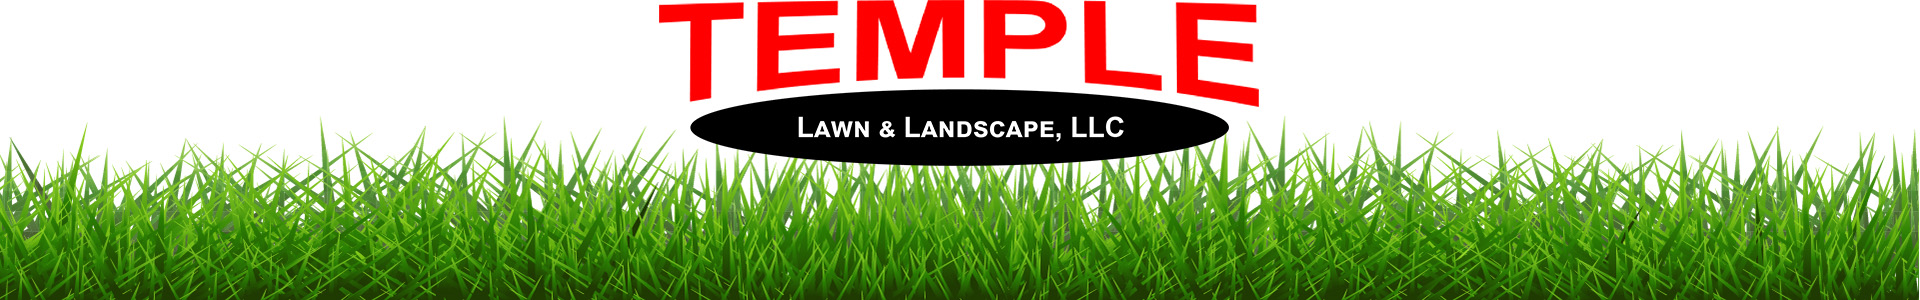 Temple Lawn and Landscape | Temple Texas